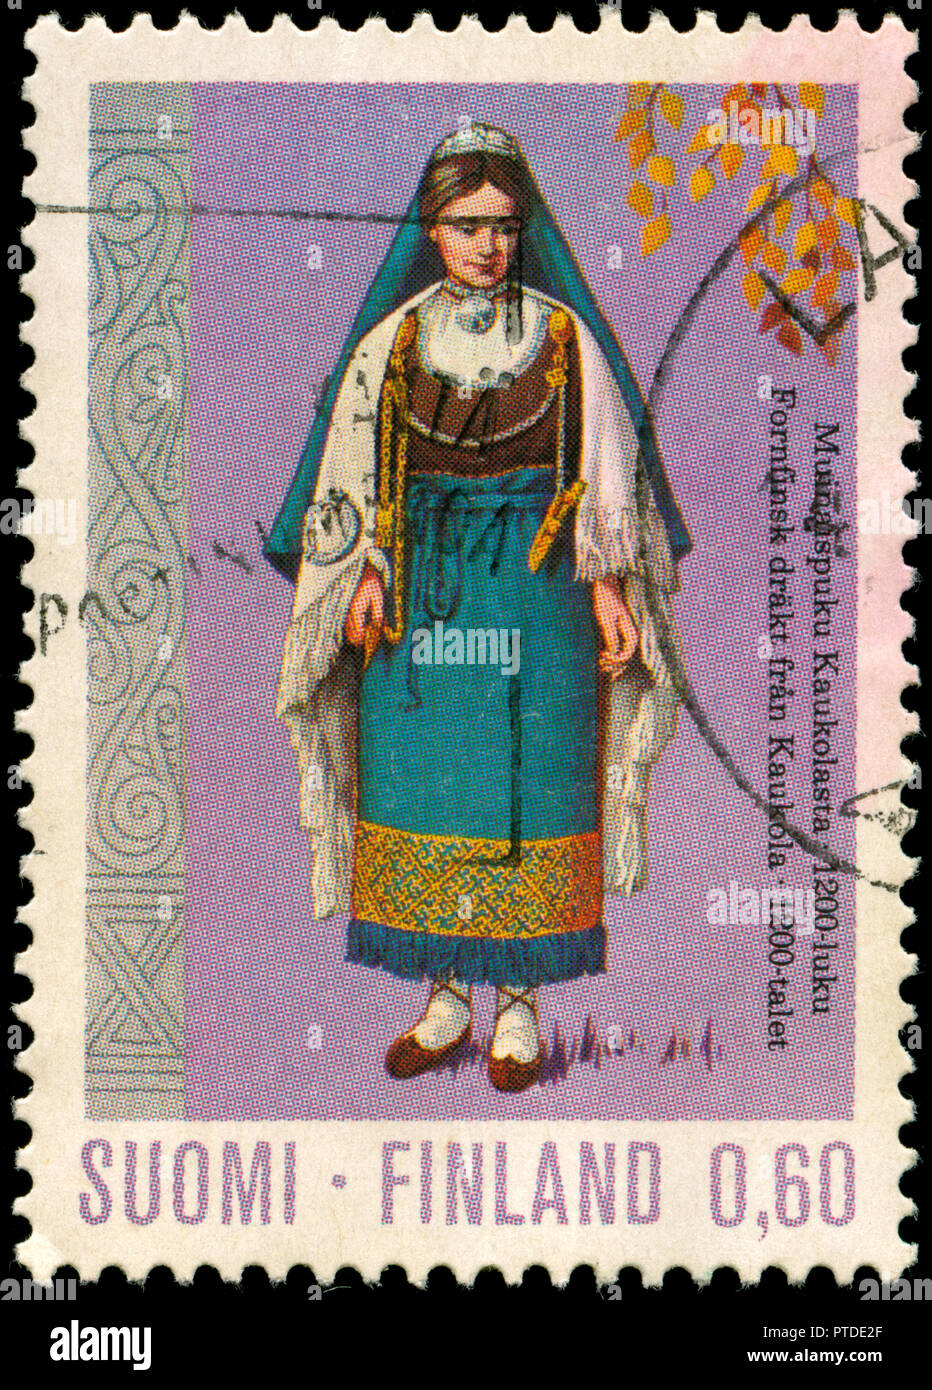 Postmarked stamp from Finland in the National costumes series issued in 1973 Stock Photo